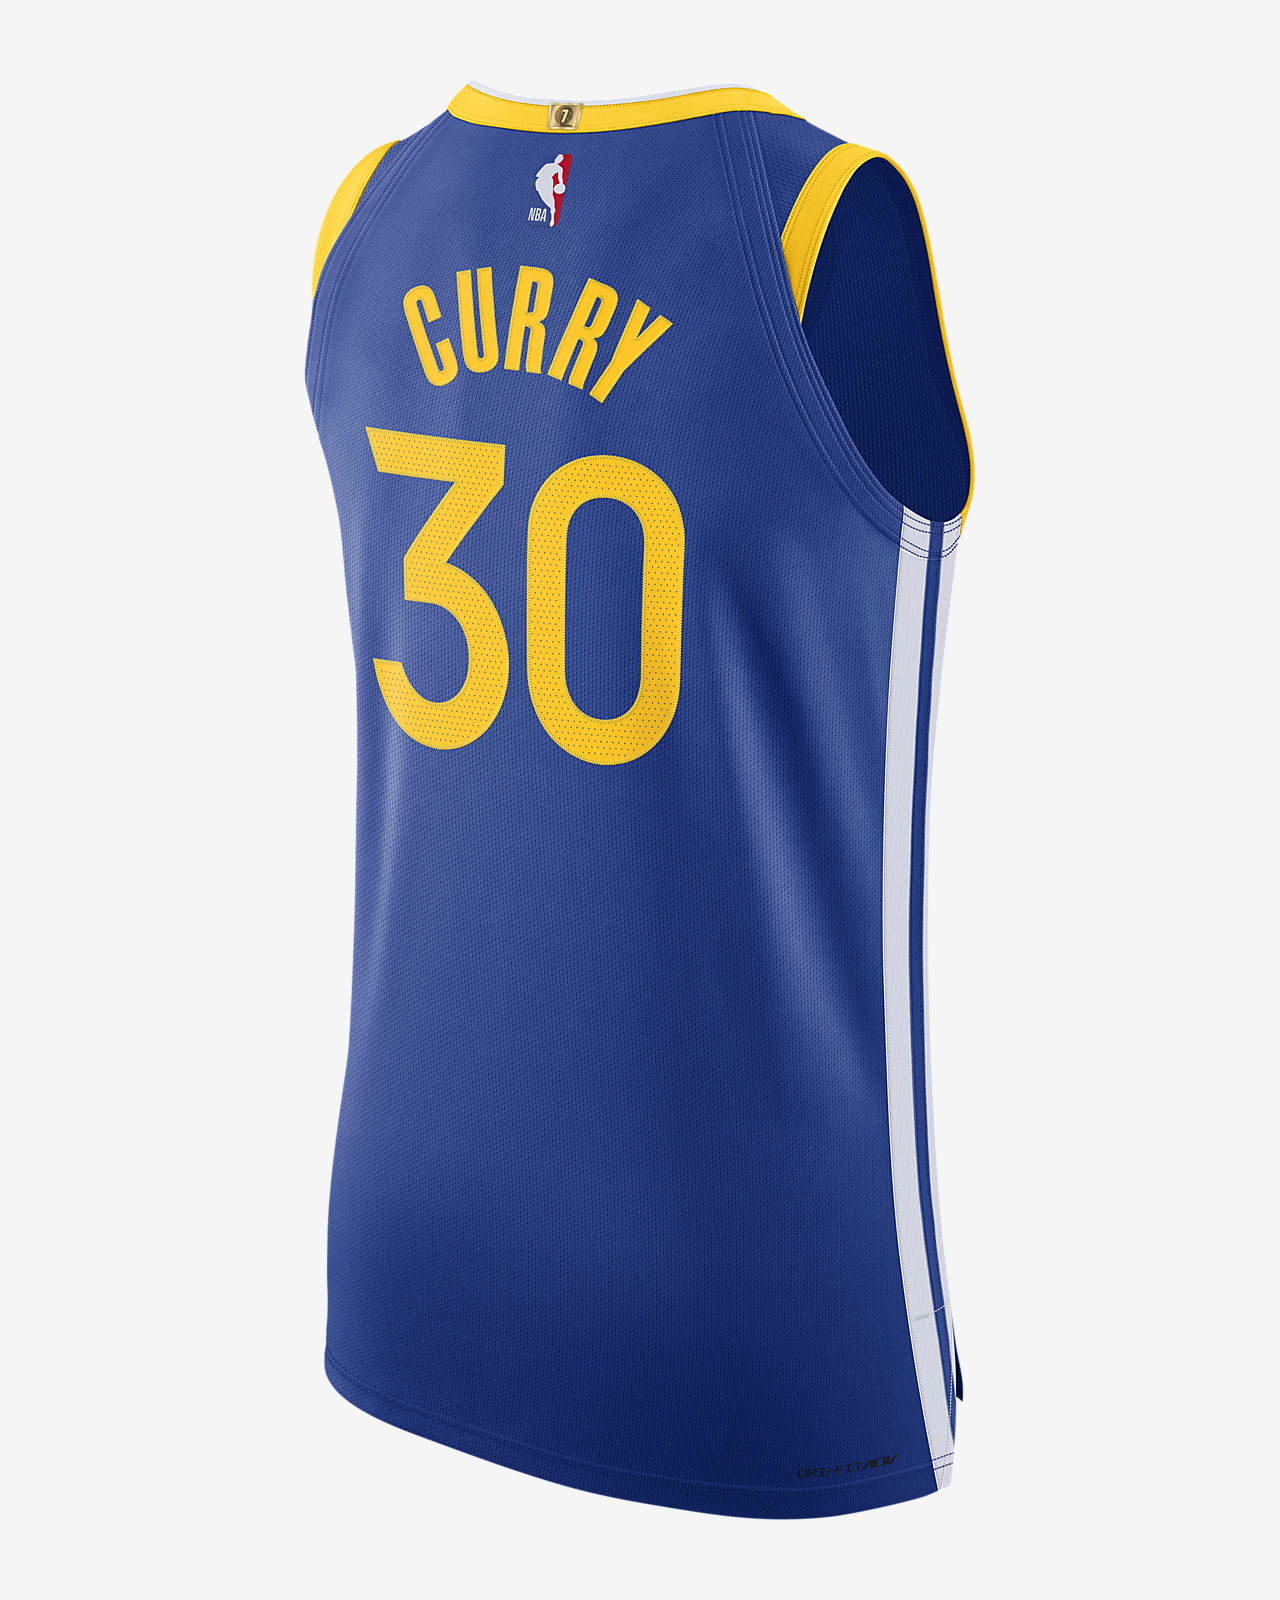 steph curry home jersey